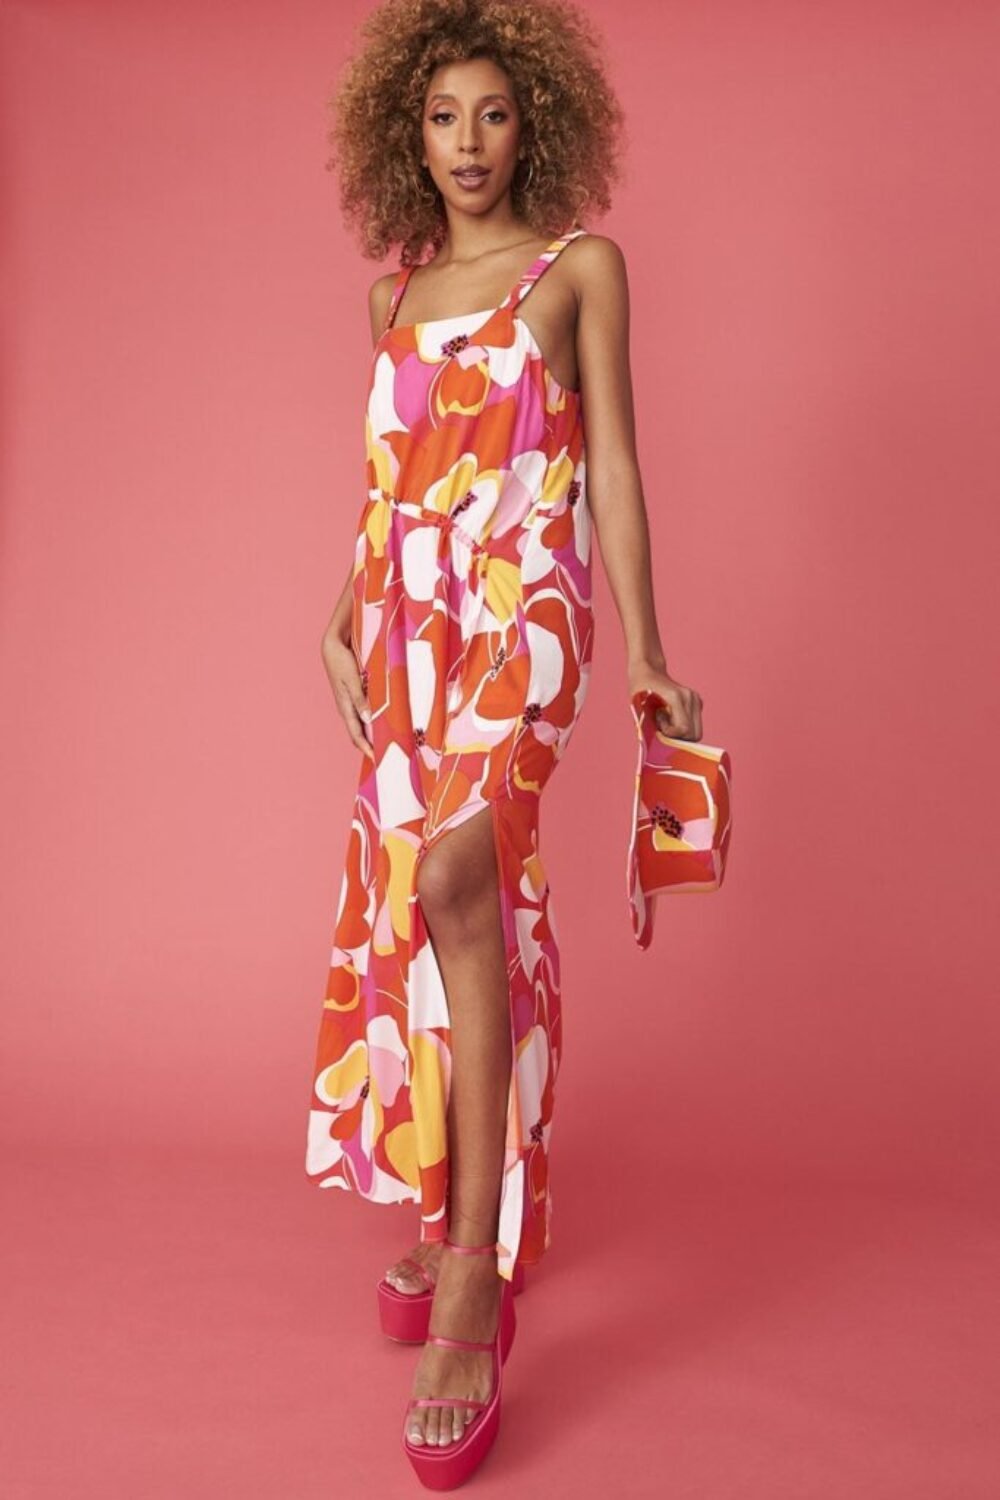 Shop Lux Florence Floral Maxi Dress with High Split and women's luxury and designer clothes at www.lux-apparel.co.uk